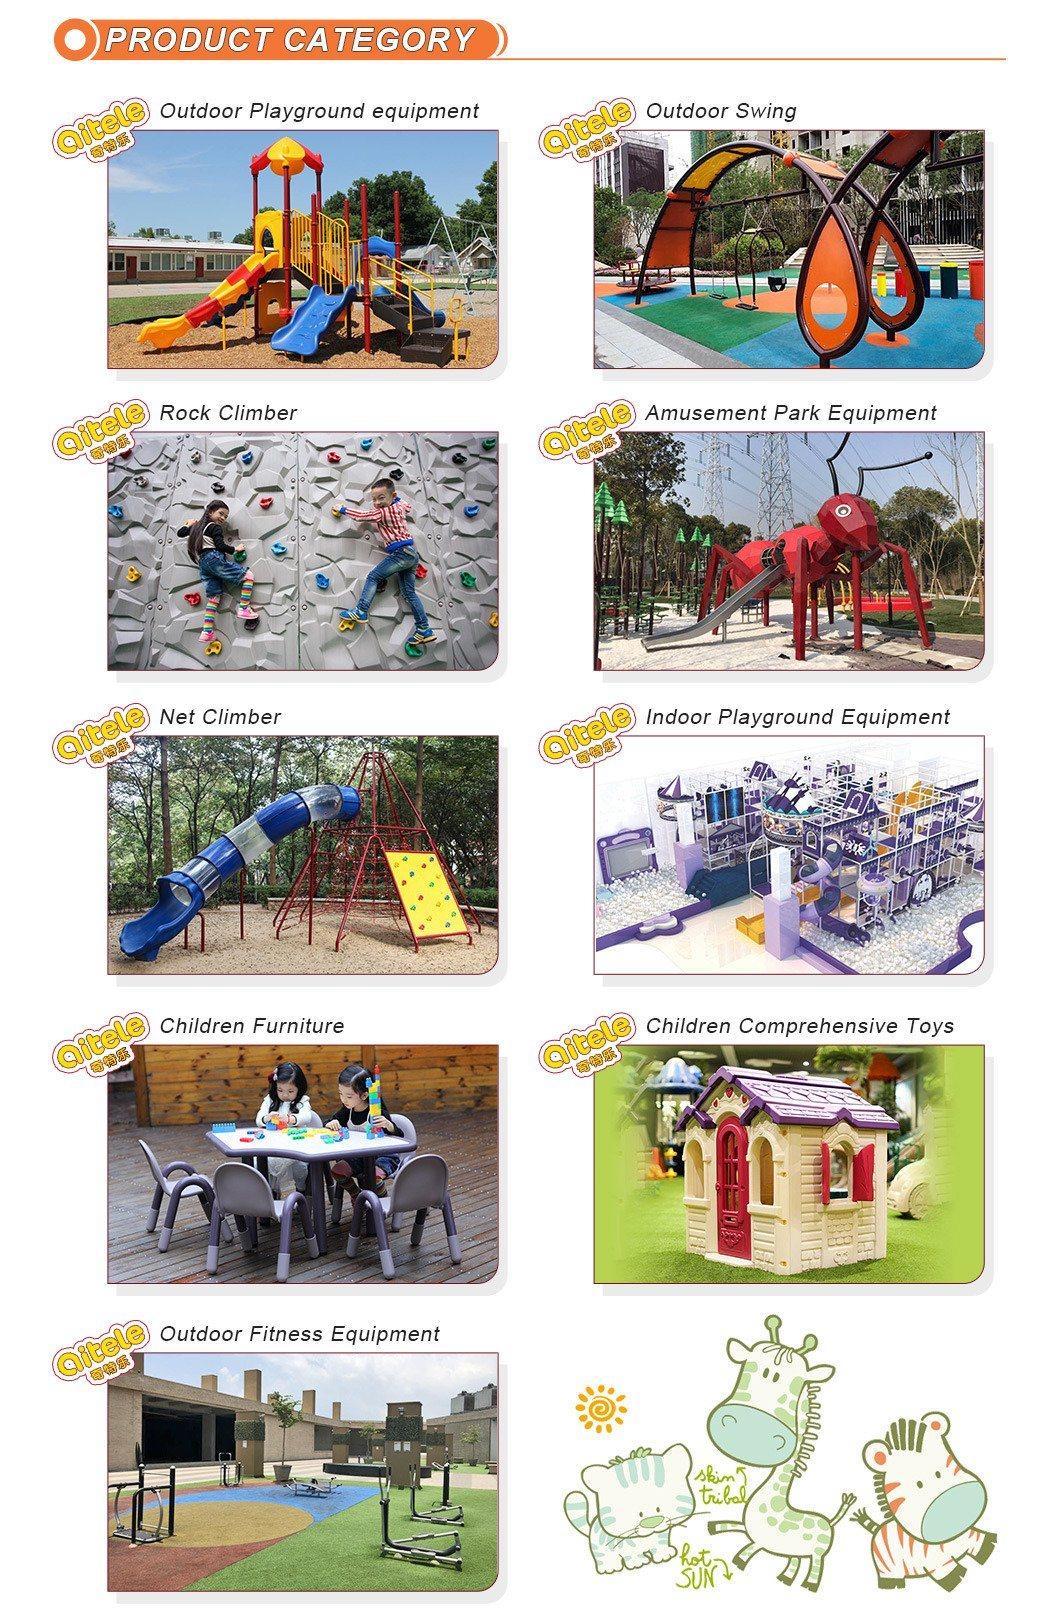 New Kids Outdoor Playground Equipment with Tube Slide